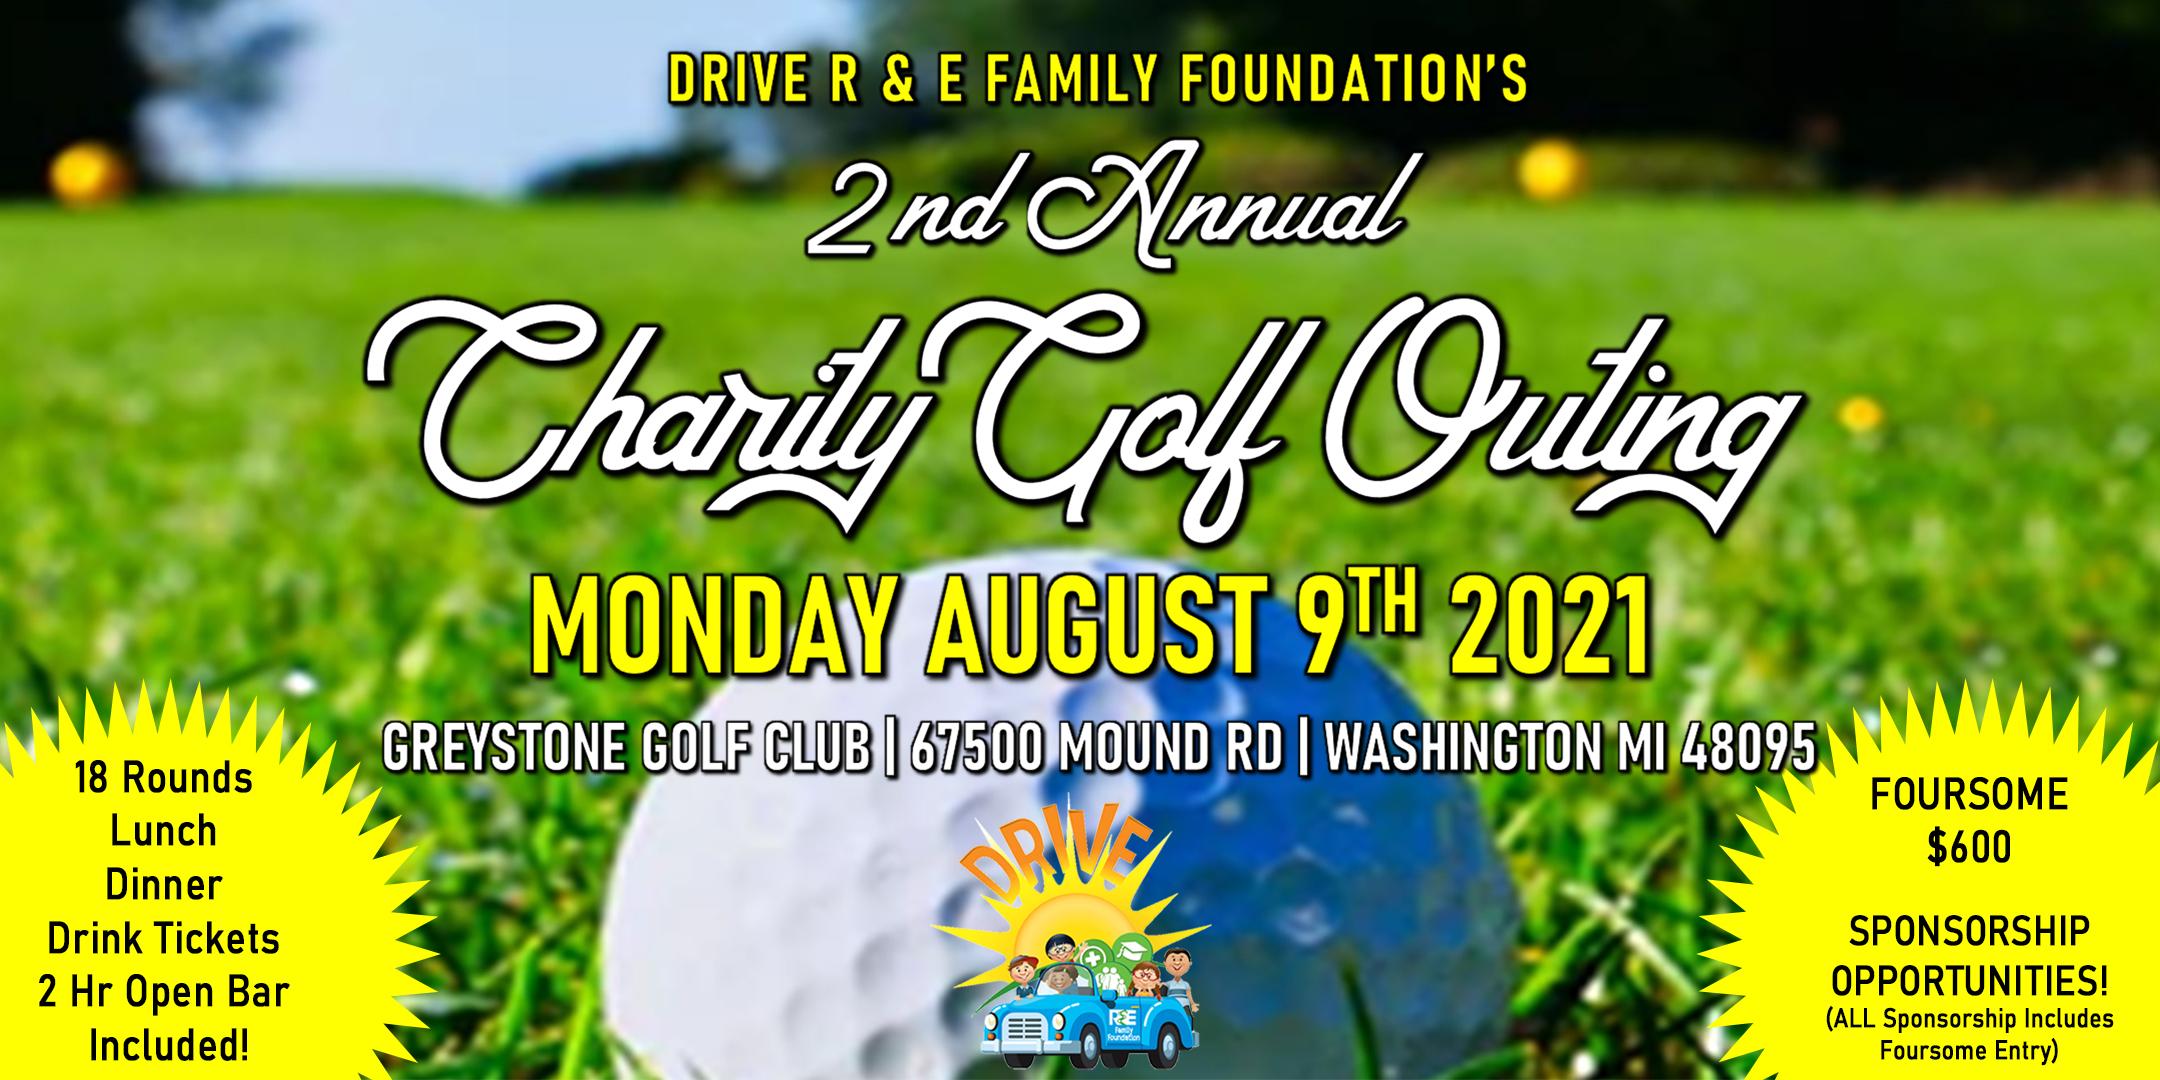 DRIVE - 2nd Annual Charity Golf Outing